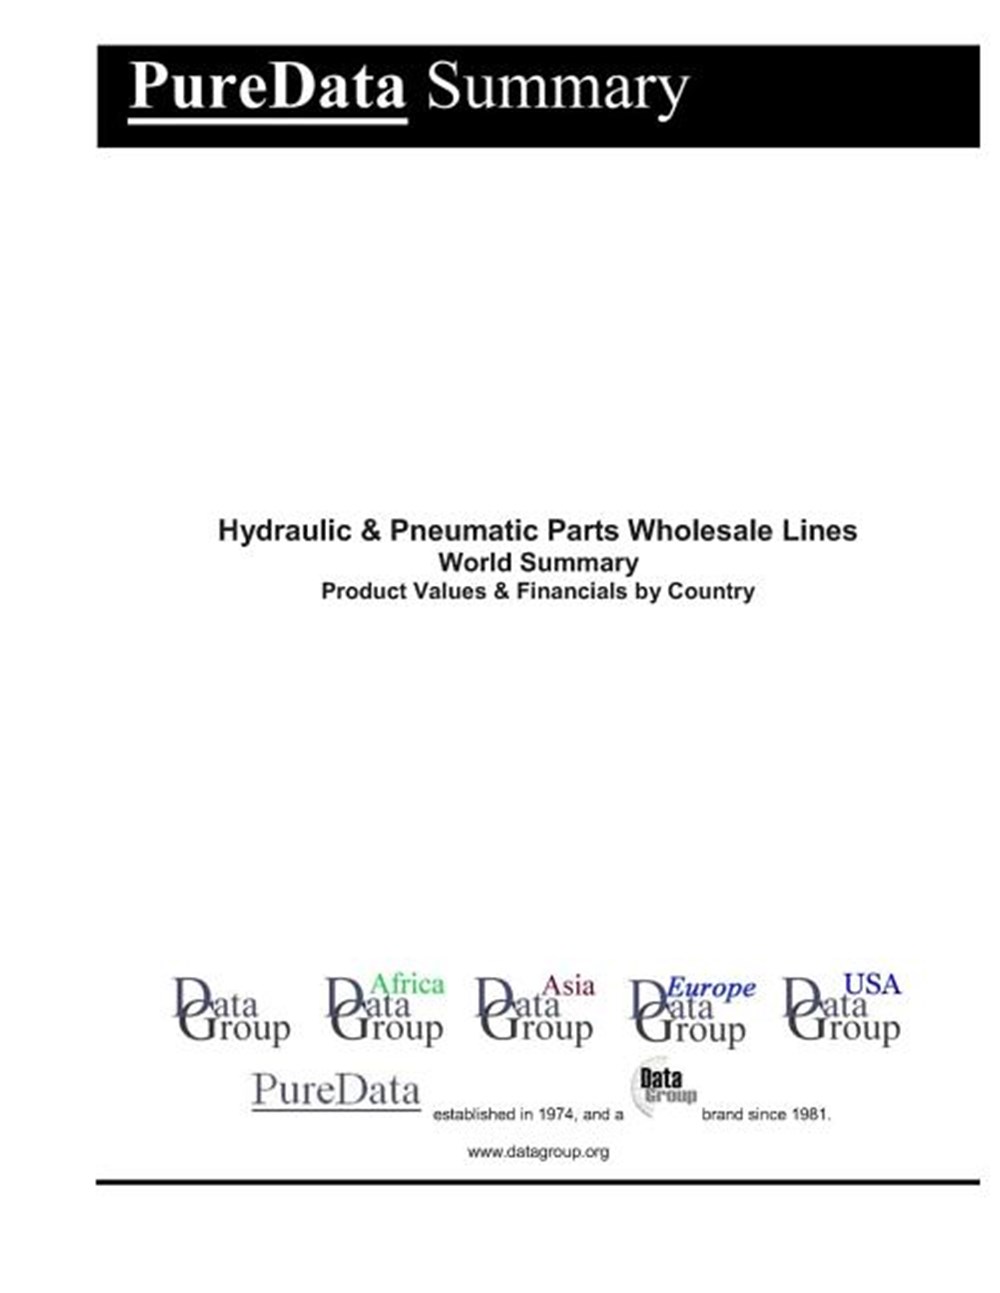 Hydraulic & Pneumatic Parts Wholesale Lines World Summary Product Values & Financials by Country